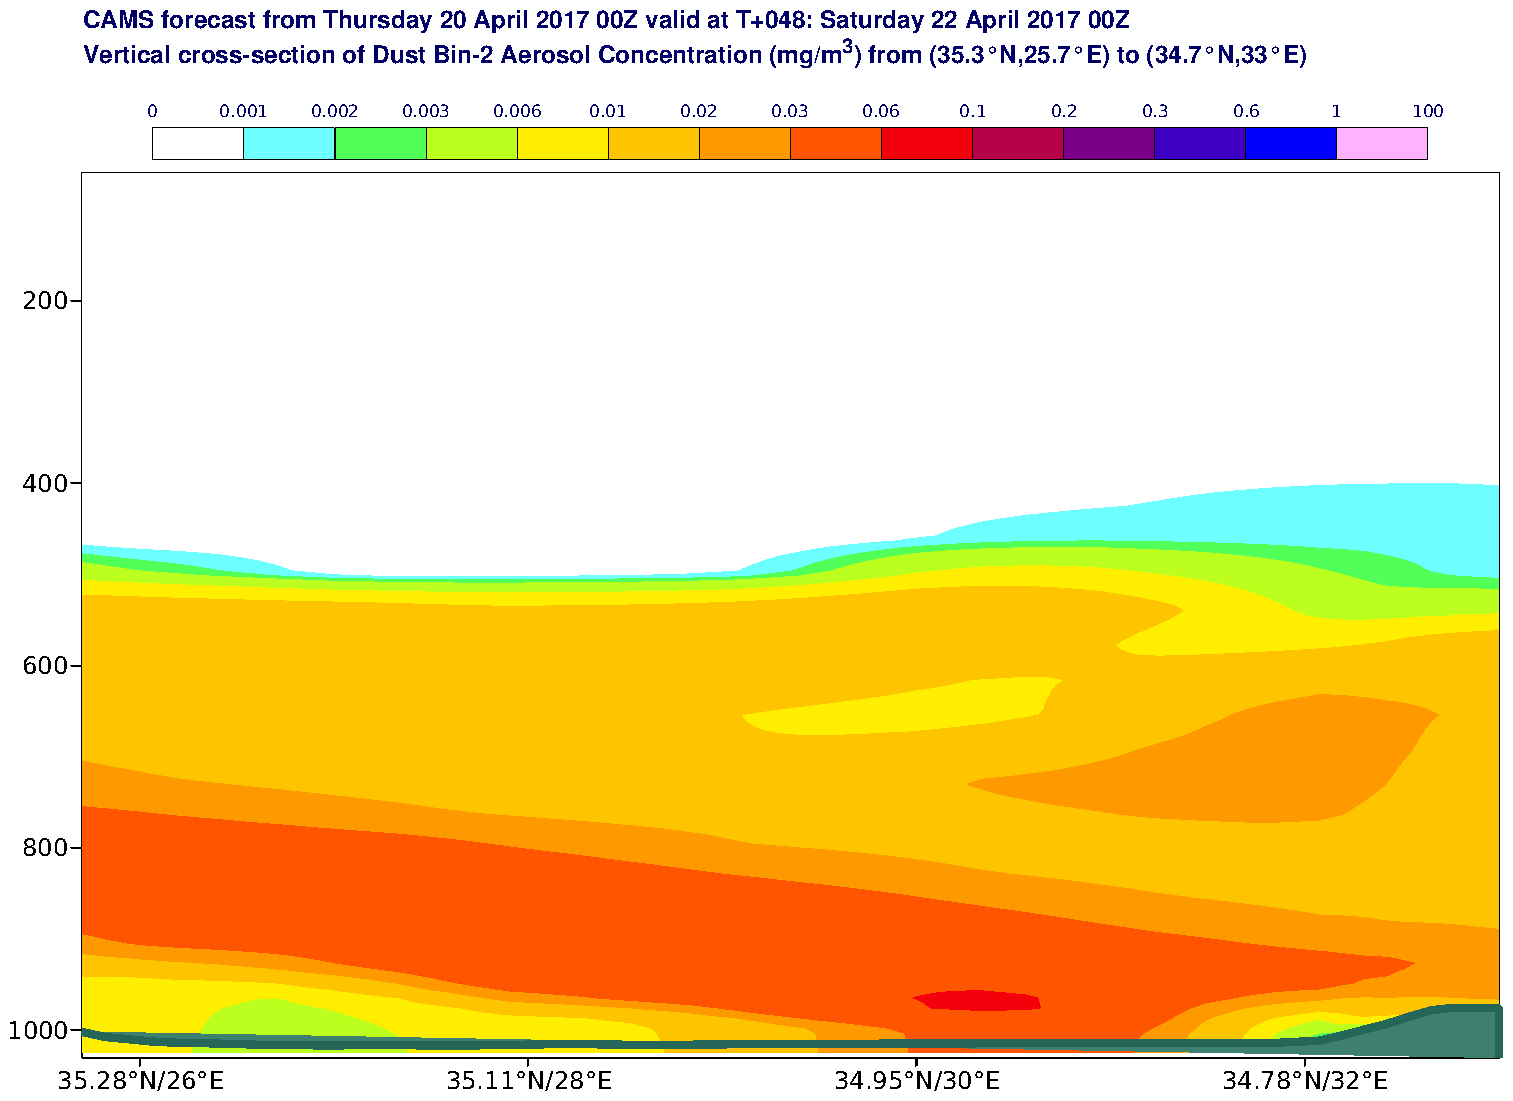 Vertical cross-section of Dust Bin-2 Aerosol Concentration (mg/m3) valid at T48 - 2017-04-22 00:00